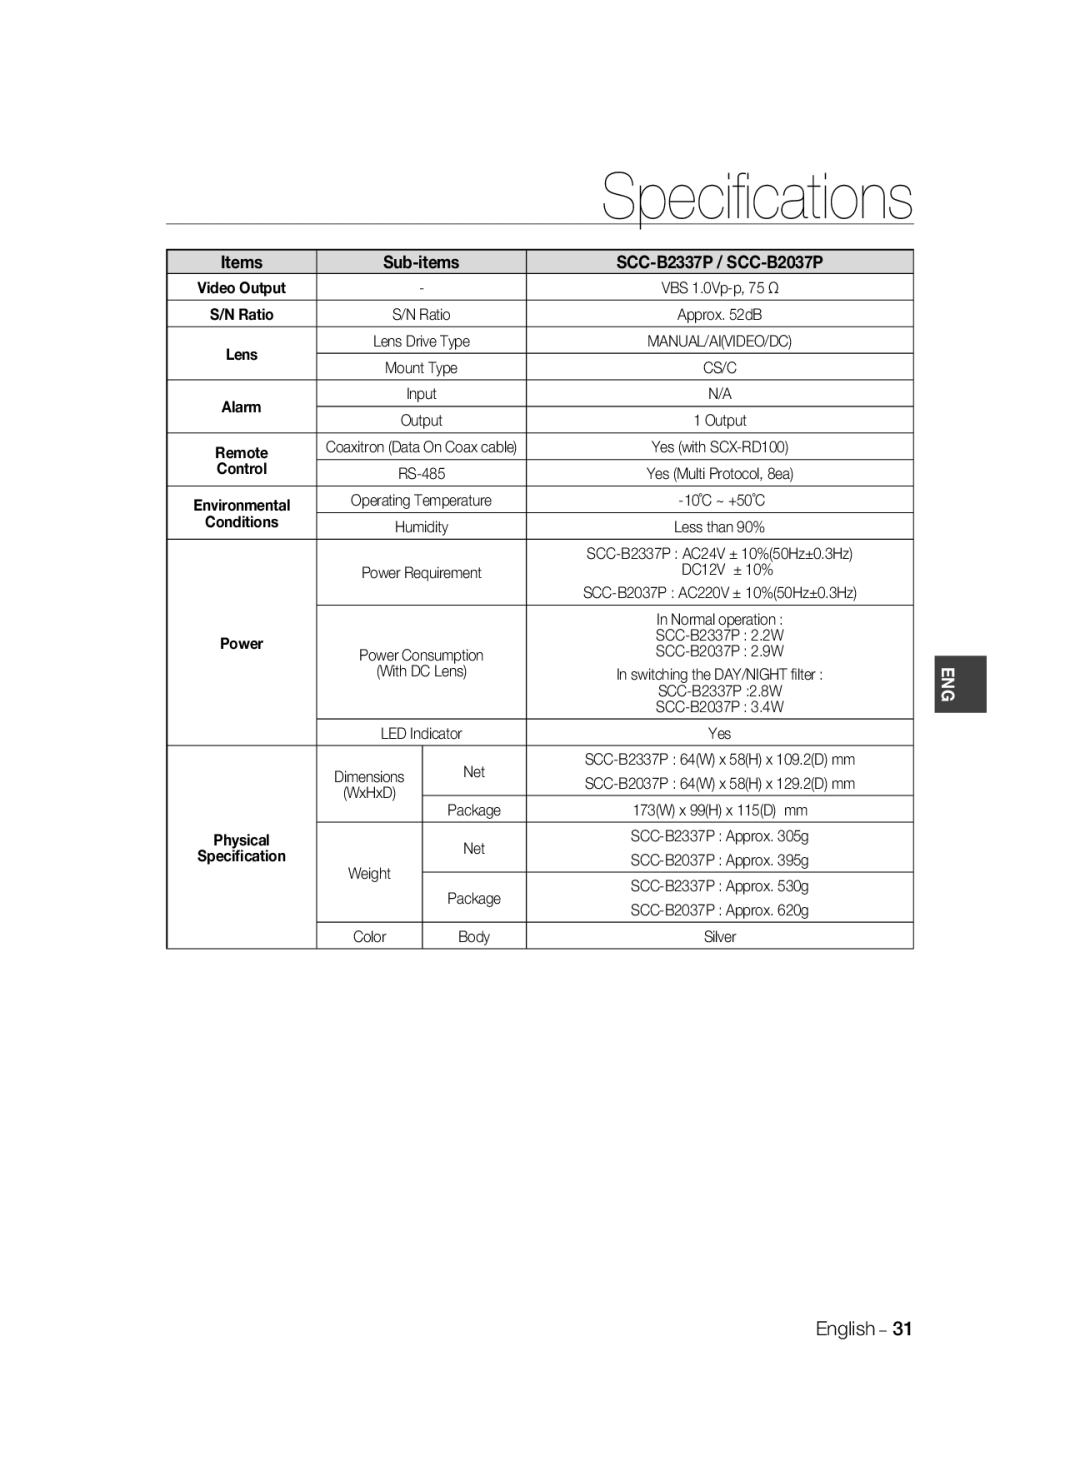 Samsung Speciﬁcations, Items, Sub-items, SCC-B2337P / SCC-B2037P, Control, Conditions, Video Output, S/N Ratio, Lens 